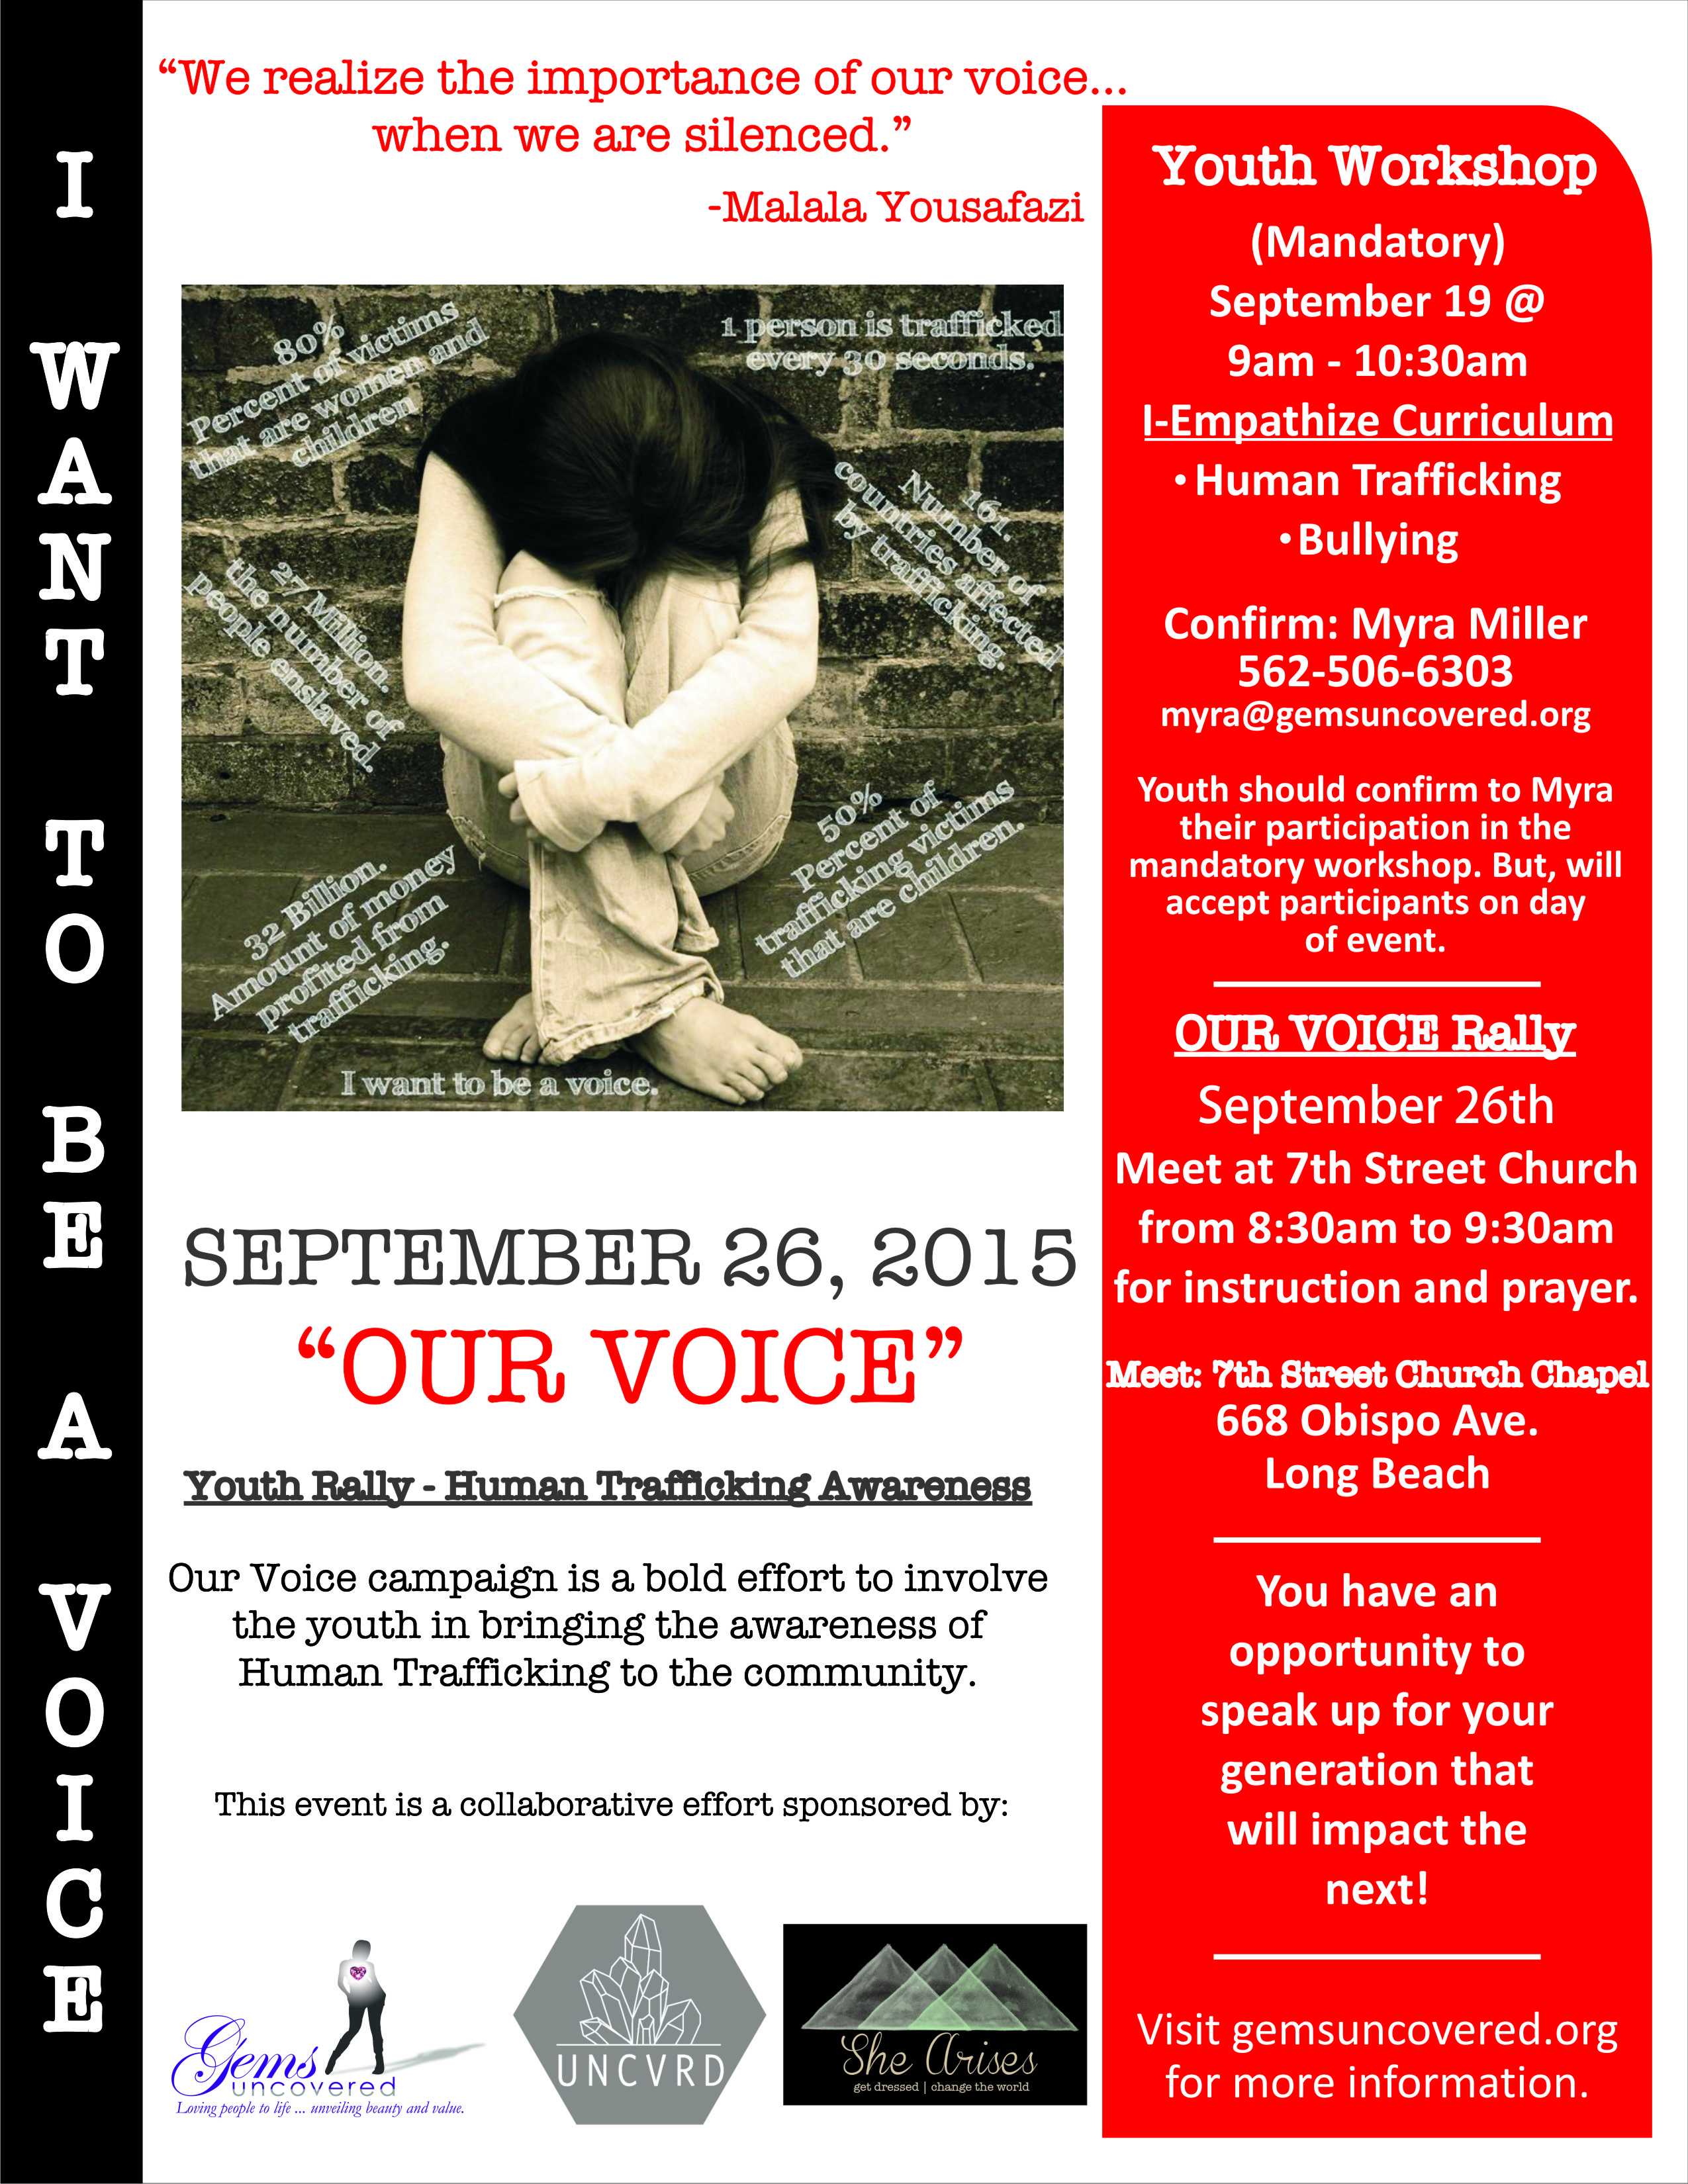 Our Voice Campaign - September 26